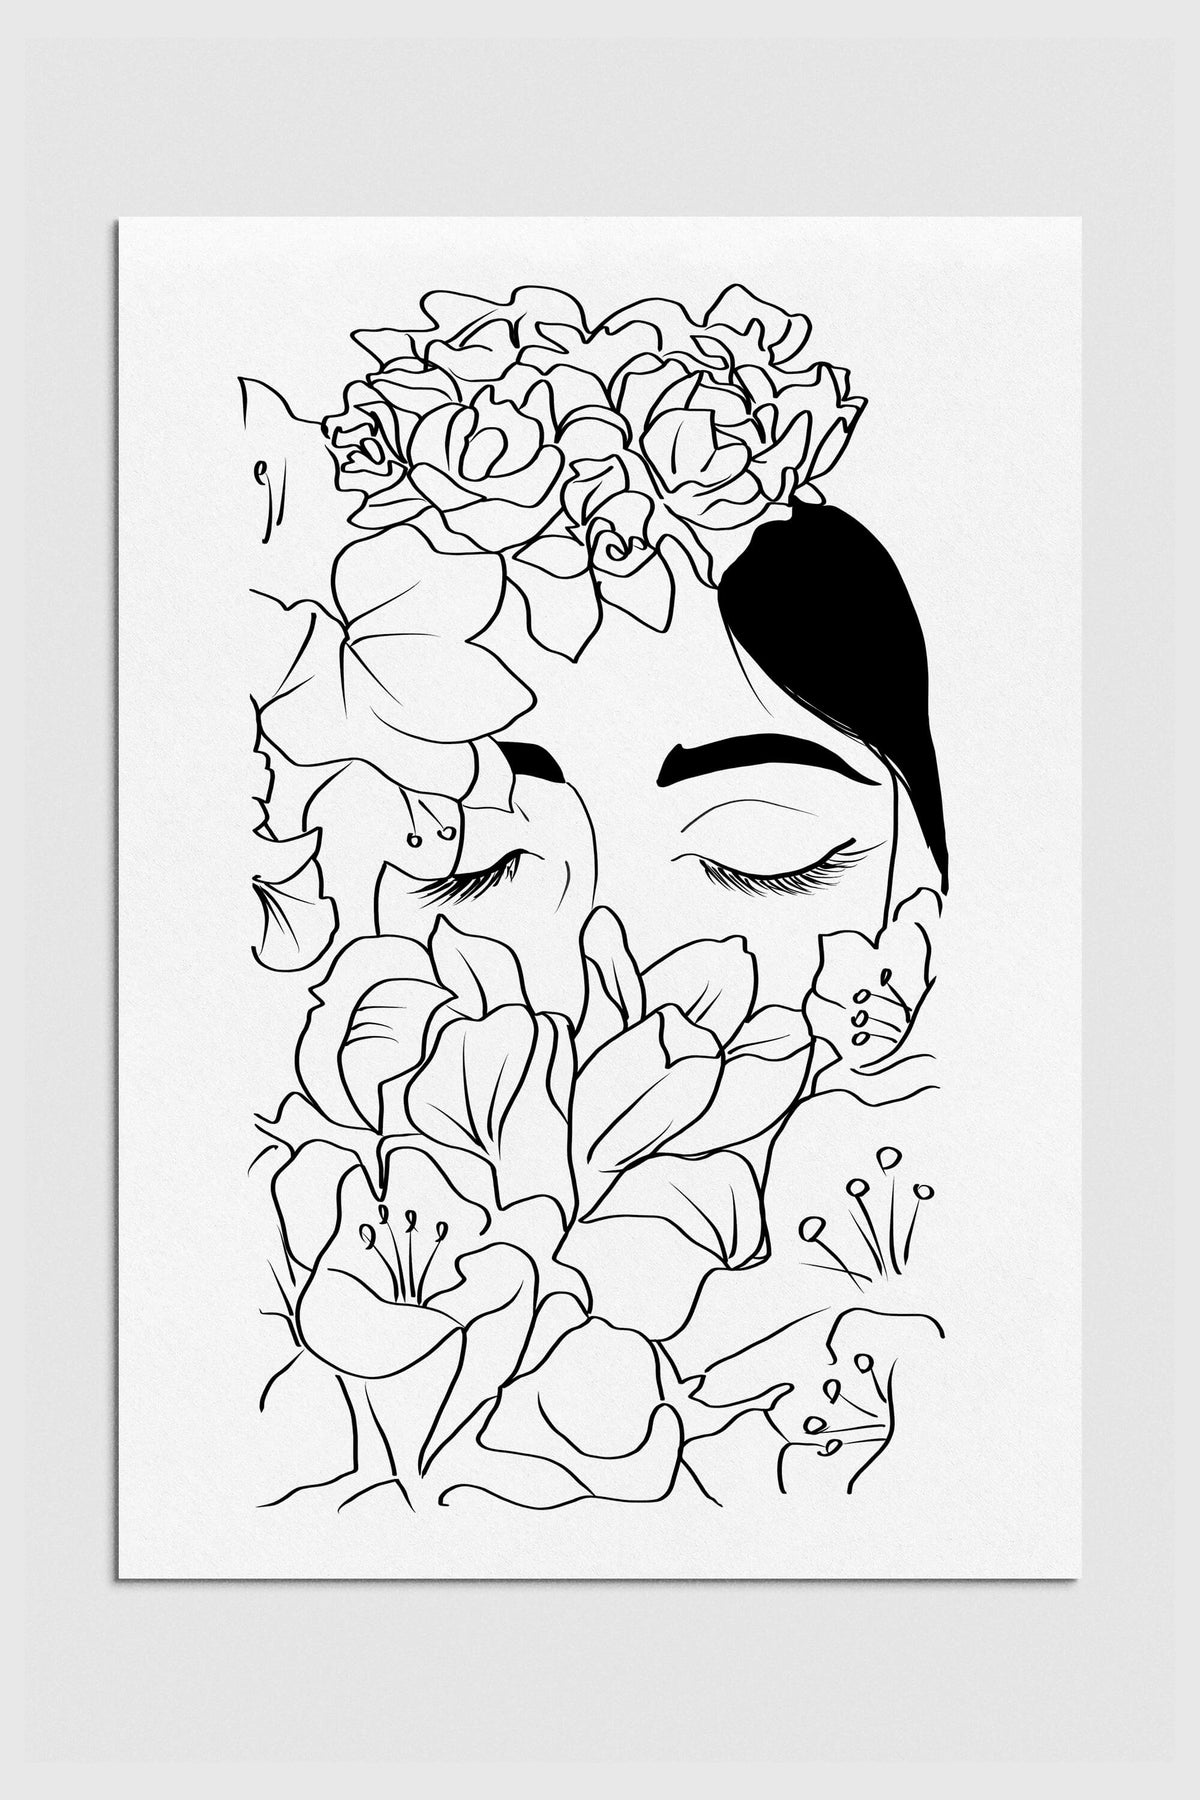 Monochrome line art of a woman's face adorned with floral elements, celebrating the strength and beauty of empowered femininity. Ideal romantic bedroom decor.